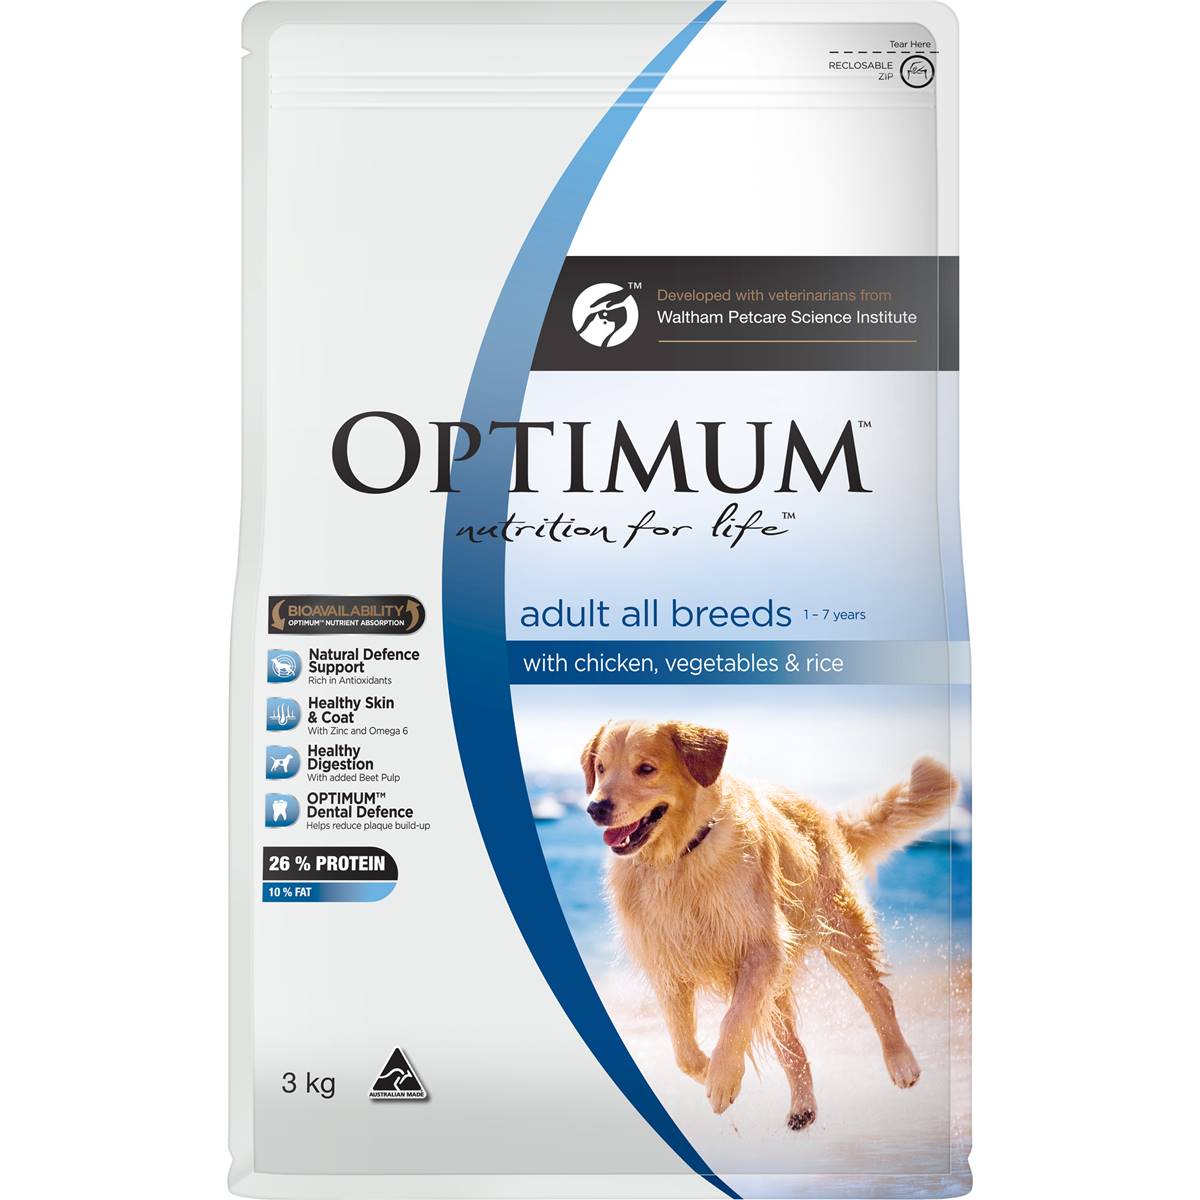 Optimum Adult Dog Food With Chicken Veges & Rice 3kg